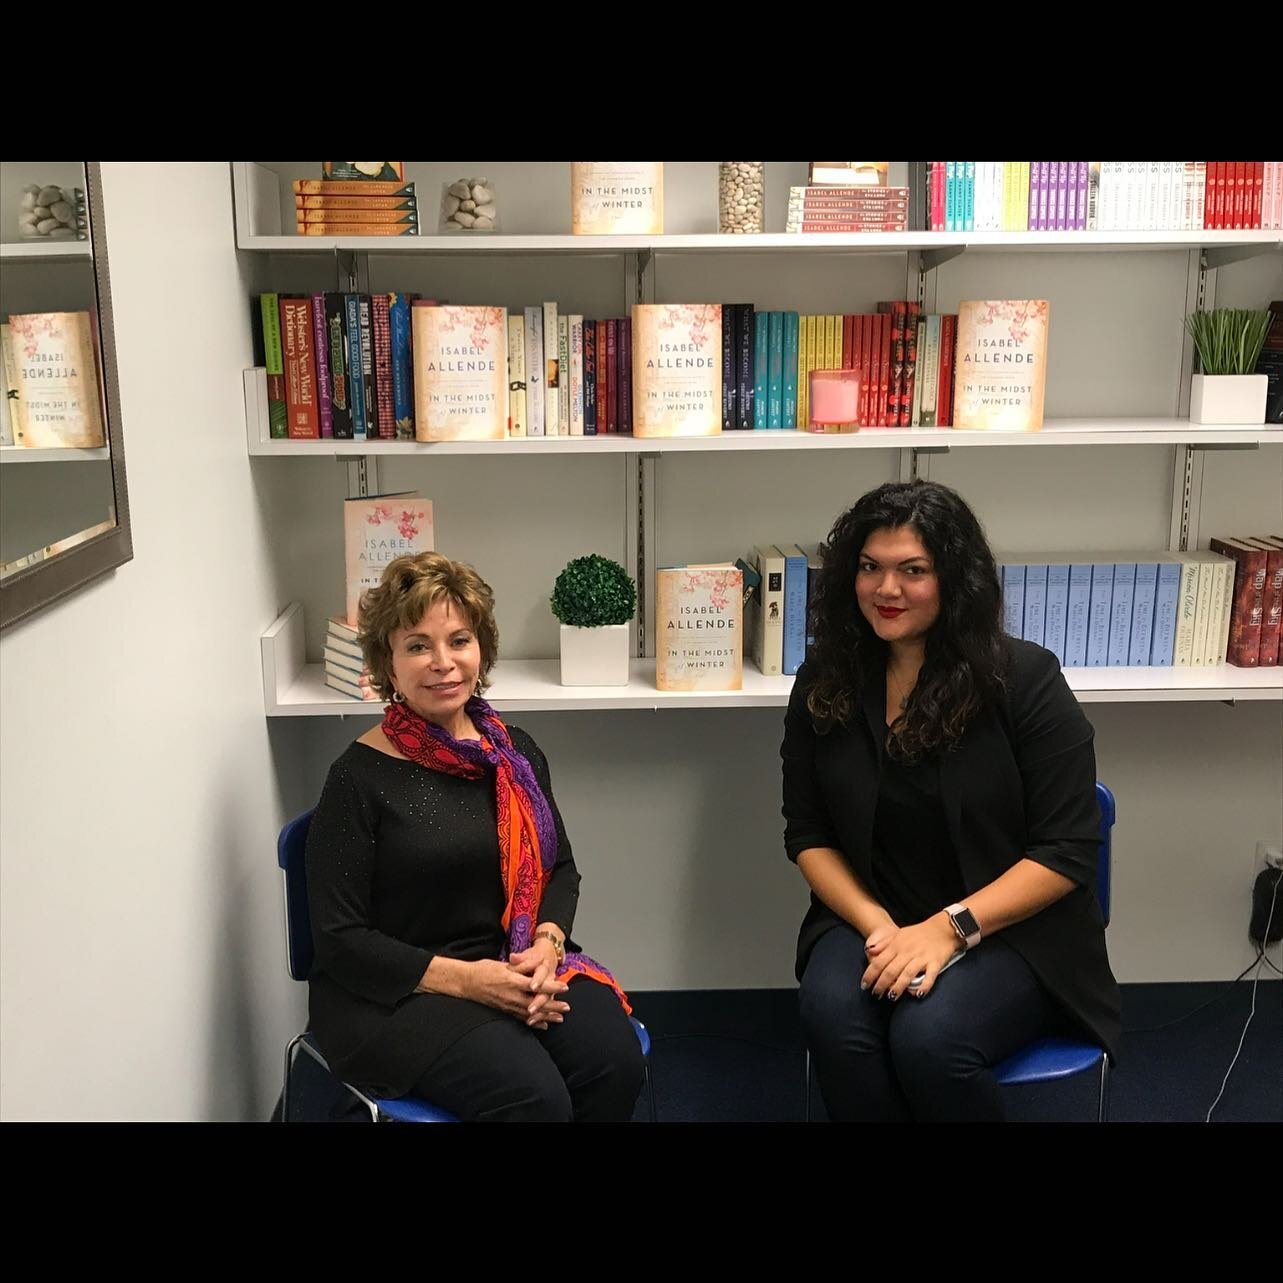 From the archives circa November 2, 2017 #TBT to when we partnered with Simon &amp; Schuster to host Isabel Allende and Zoraida C&oacute;rdova in conversation via Facebook Live. #latinxinpublishing #latinobookmonth